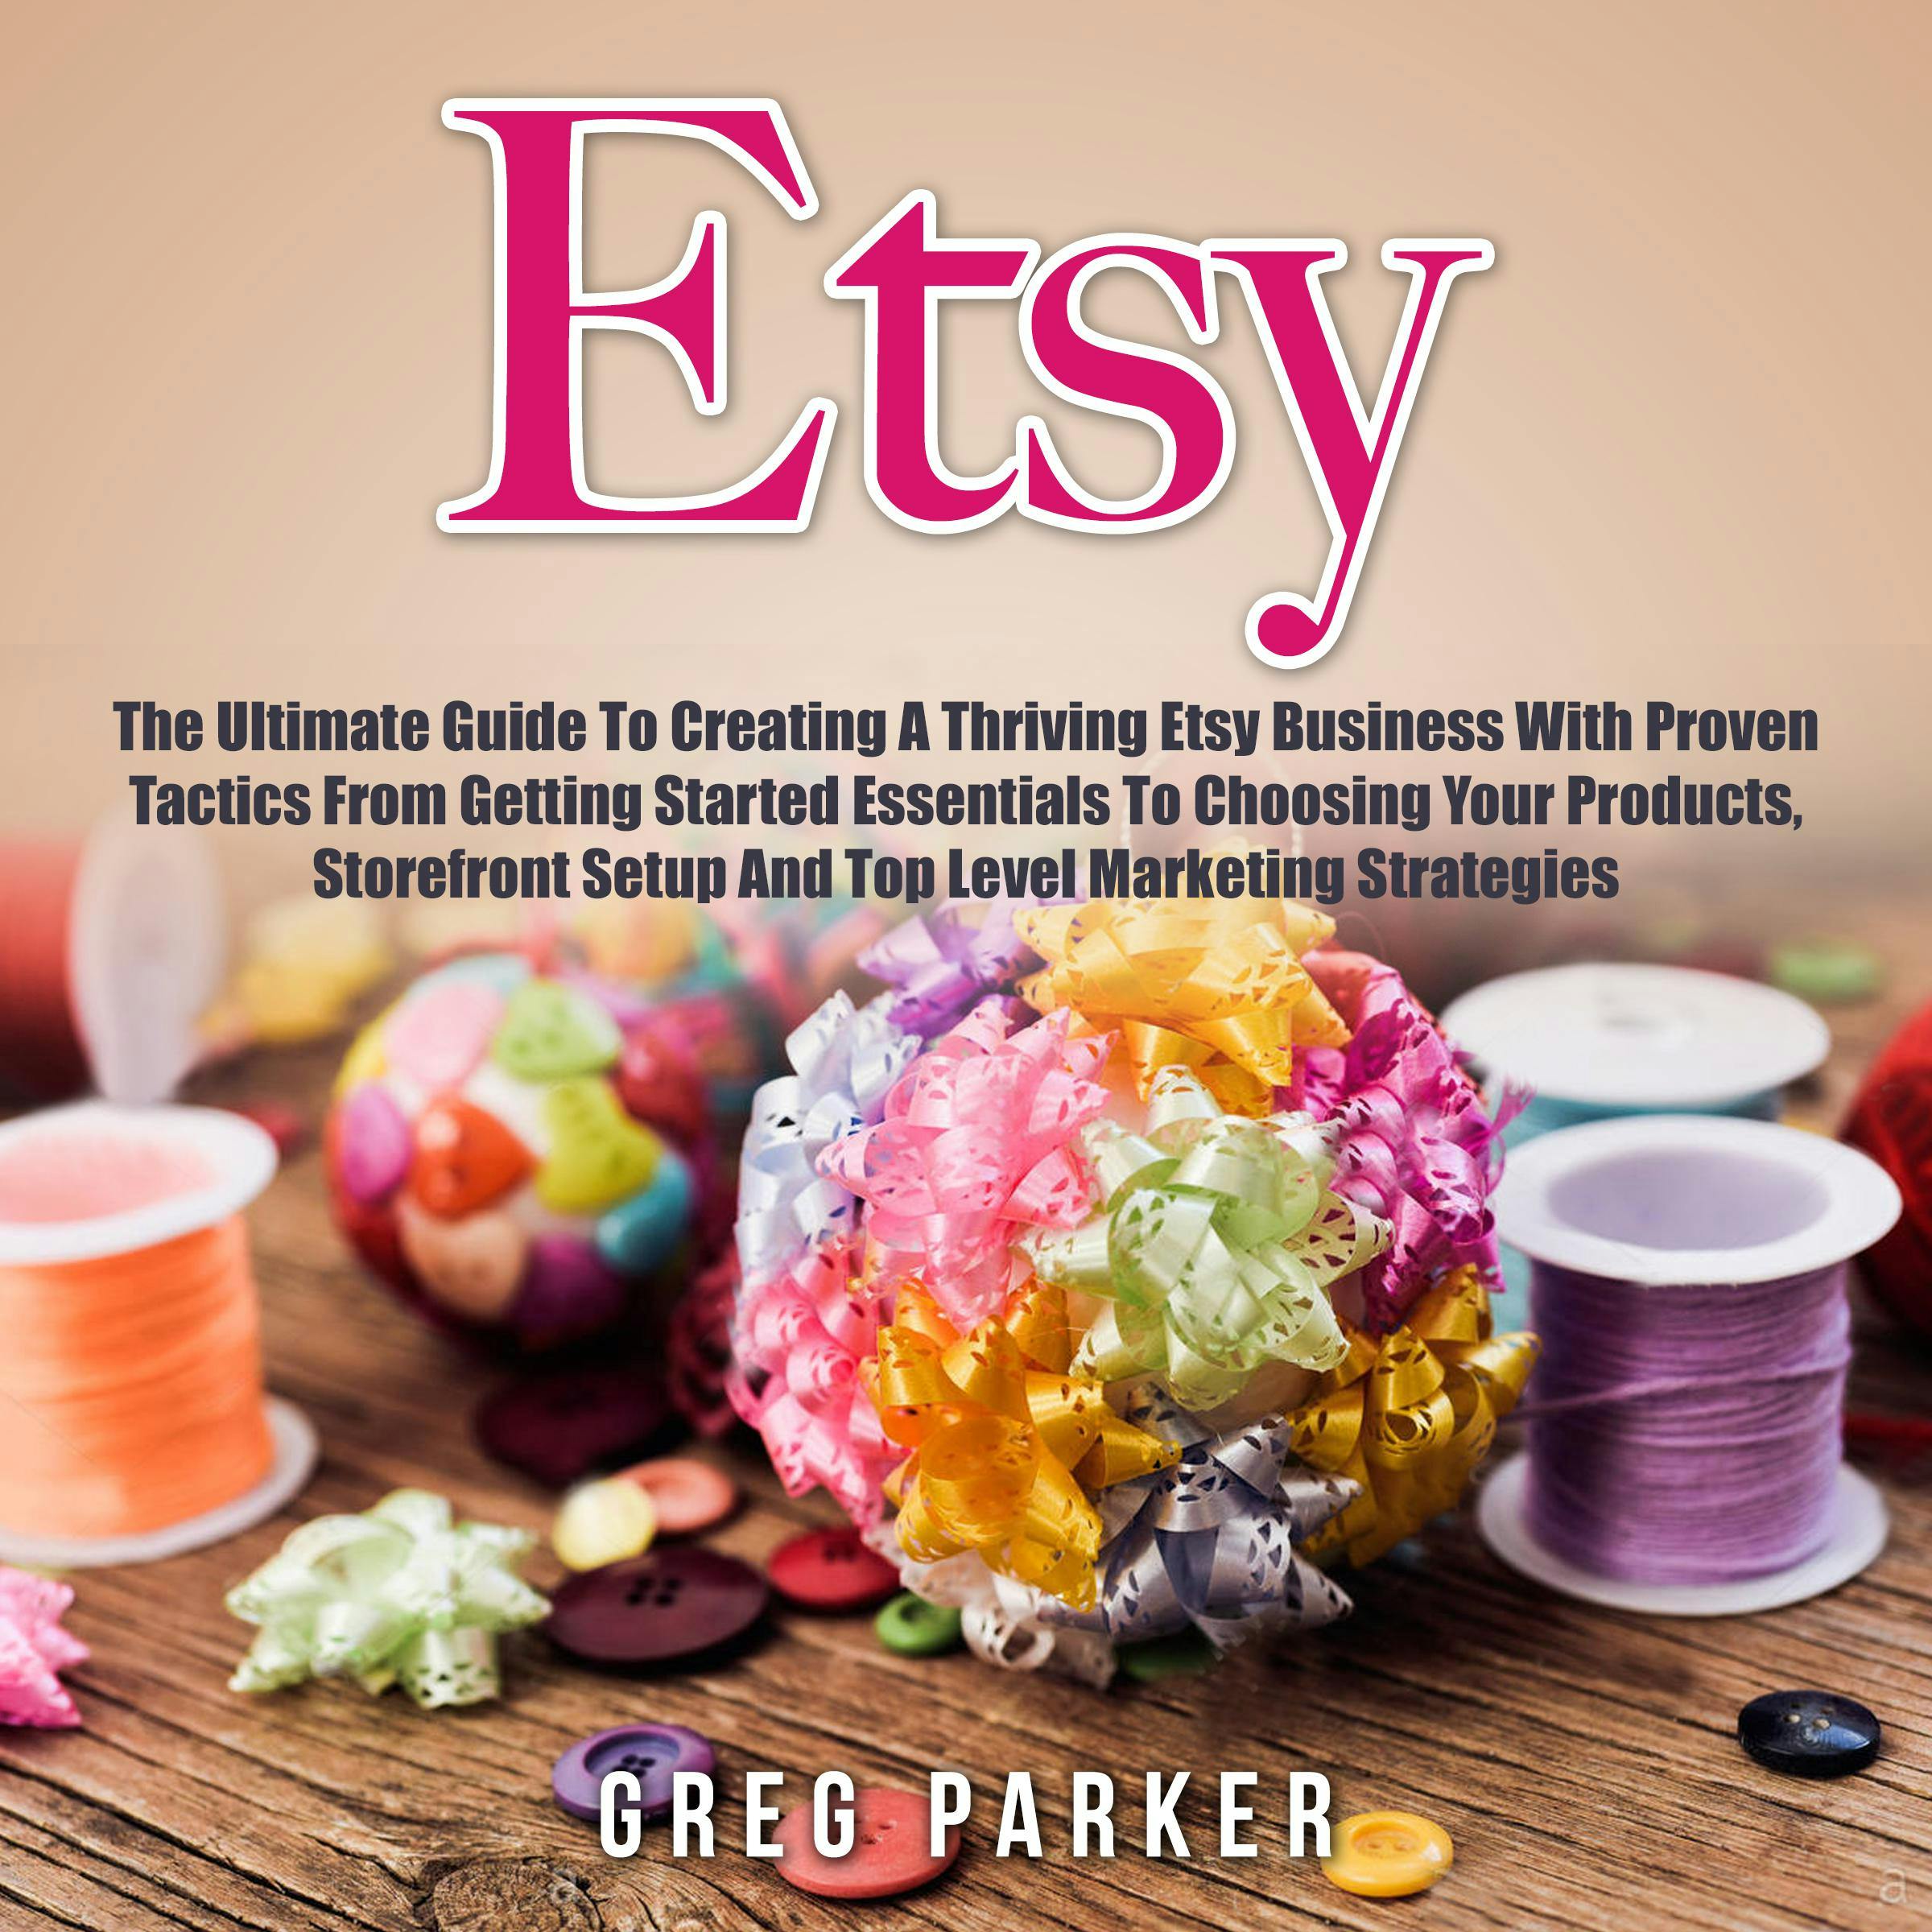 Etsy: The Ultimate Guide To Creating A Thriving Etsy Business With Proven Tactics From Getting Started Essentials To Choosing Your Products, Storefront Setup And Top Level Marketing Strategies - undefined